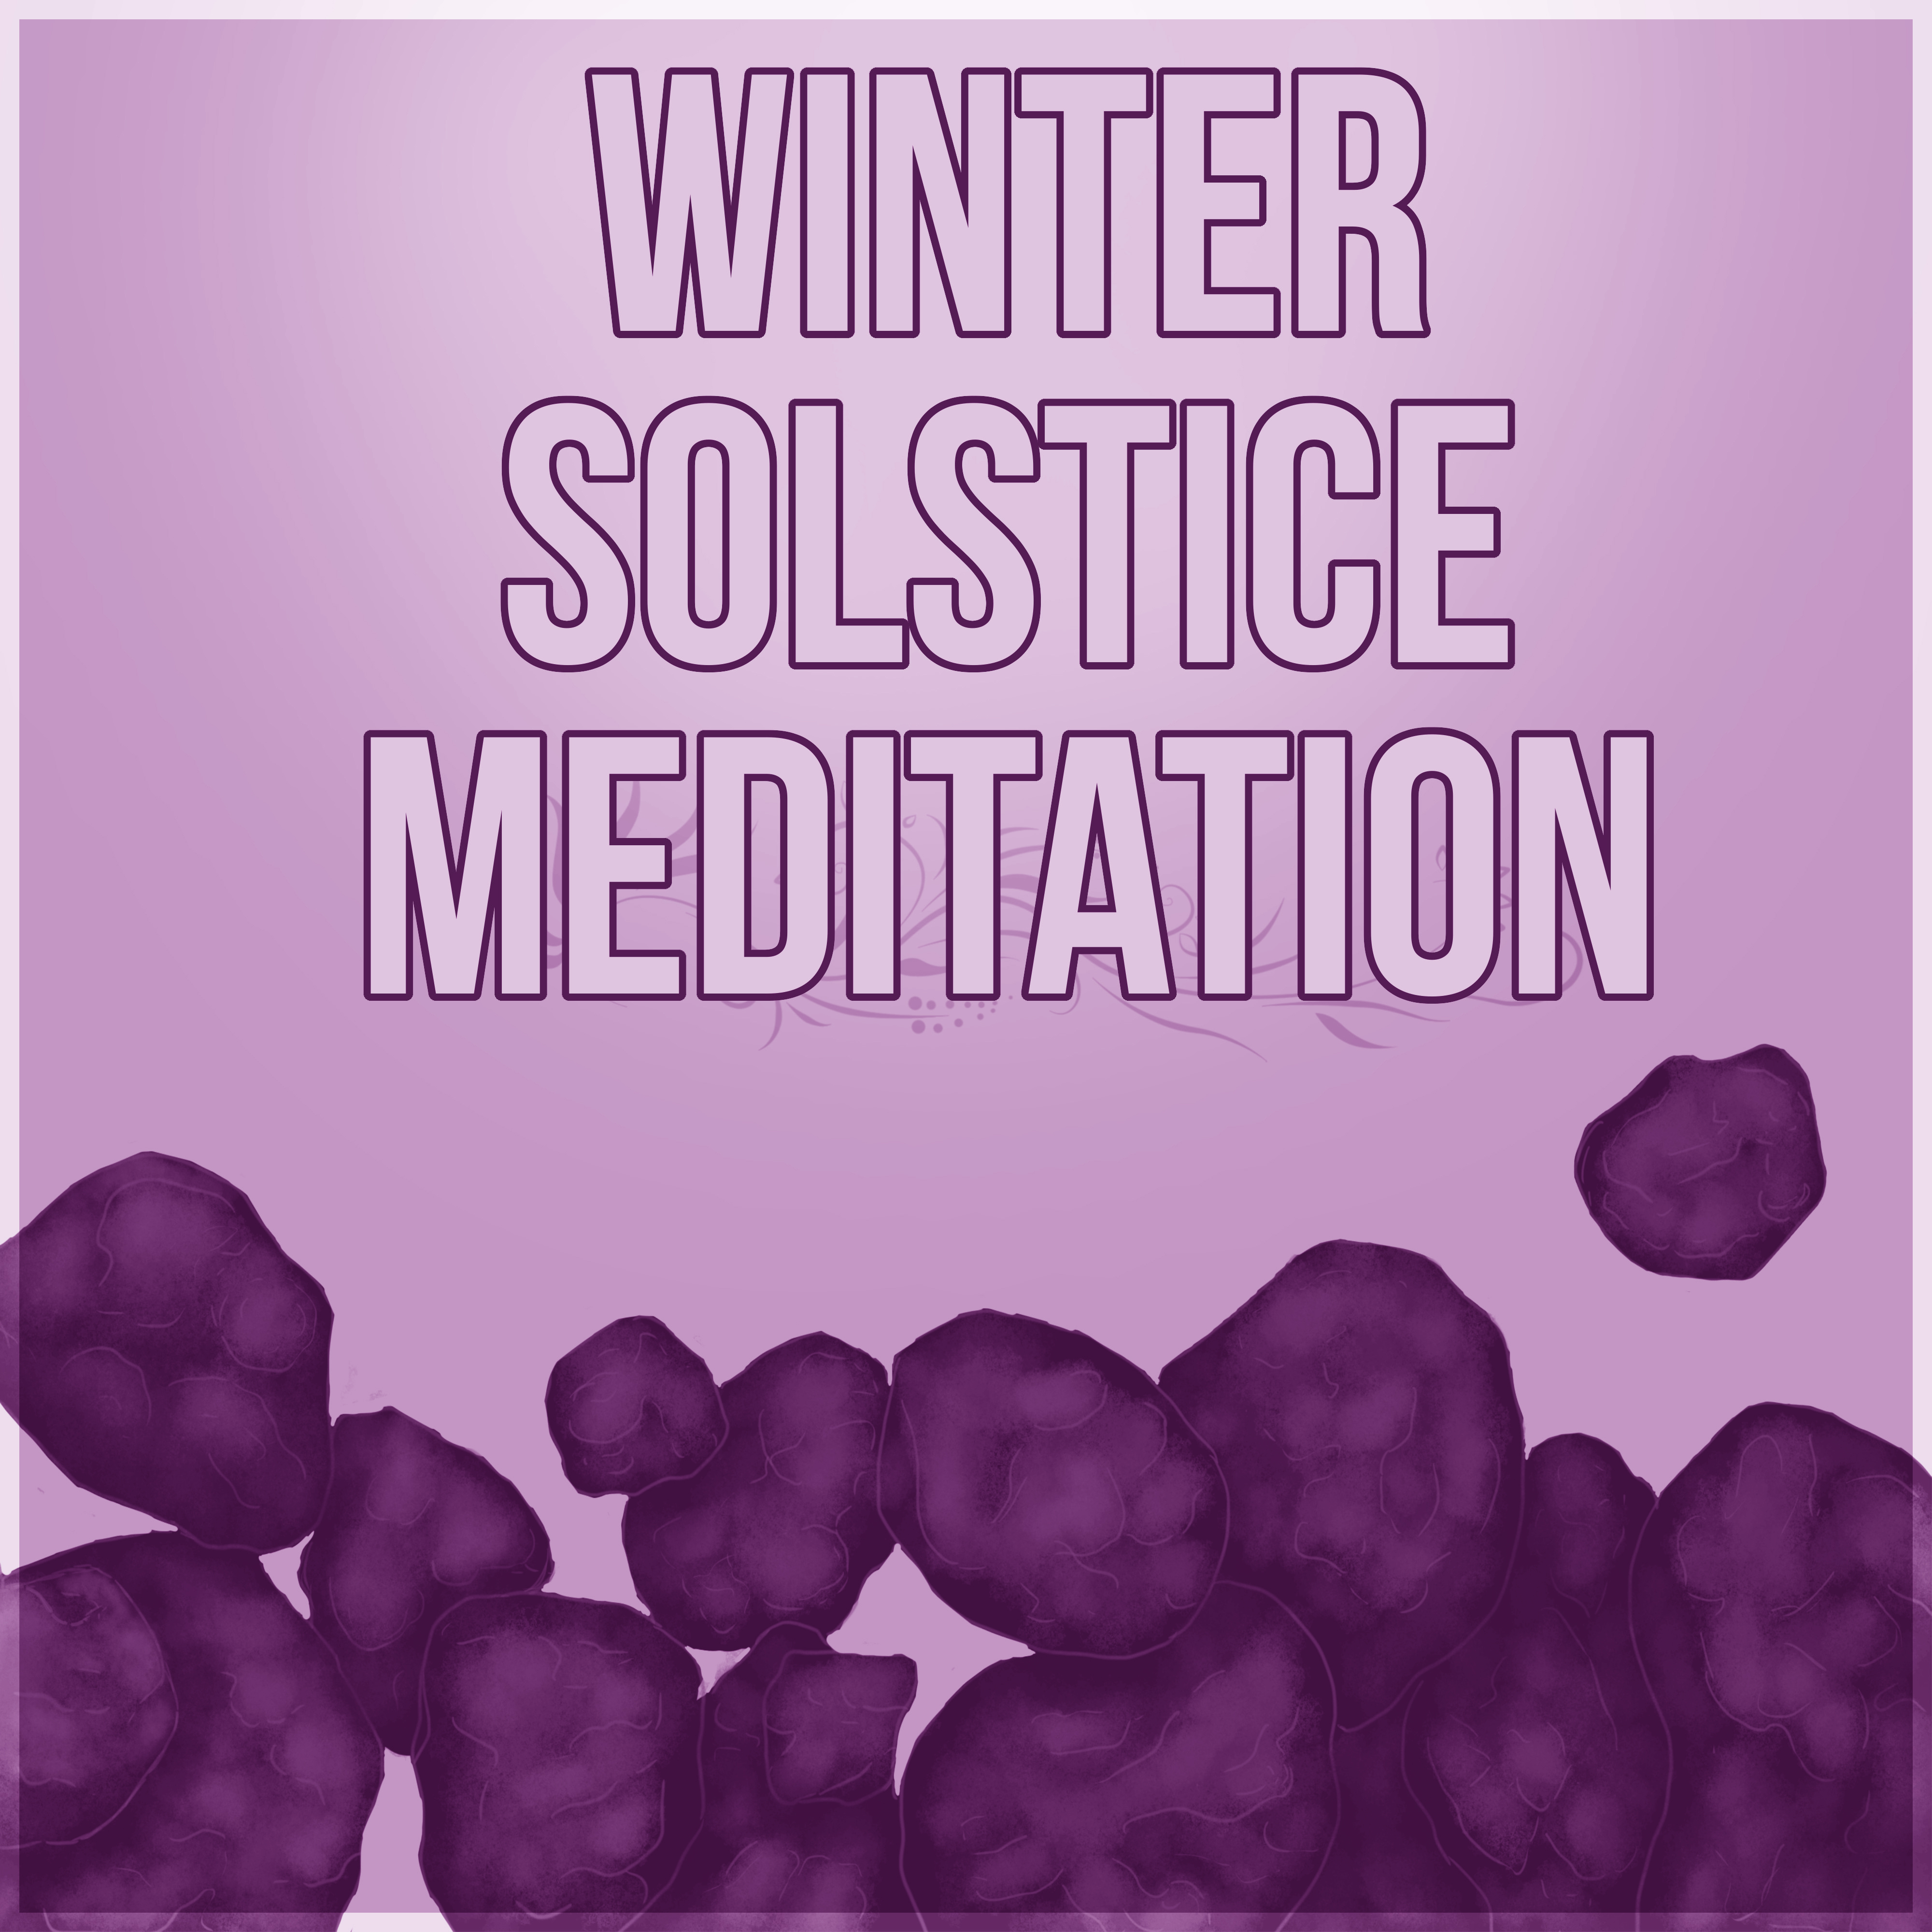 Winter Solstice Meditation - Sounds of Nature for Sleeping, Music for Stress Relief, Relaxation, Study, Reiki, Yoga, Spa, Massage